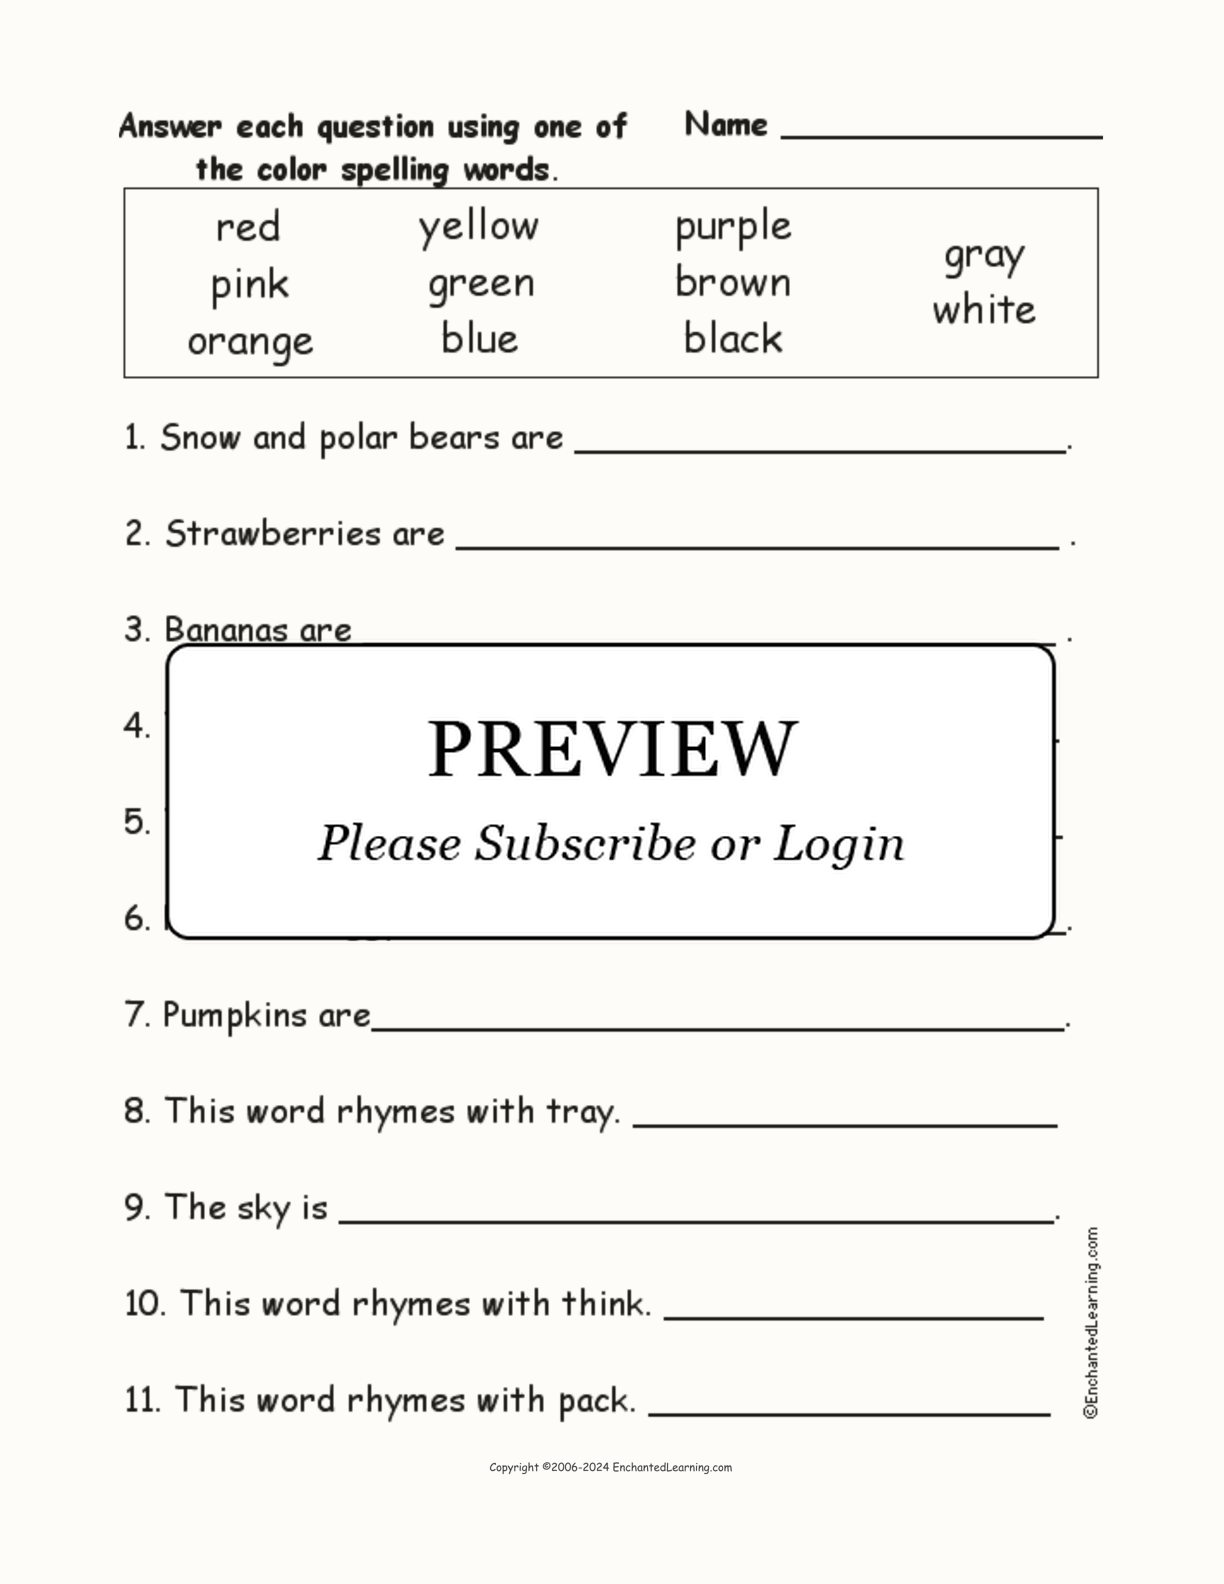 Color Spelling Word Questions interactive worksheet page 1